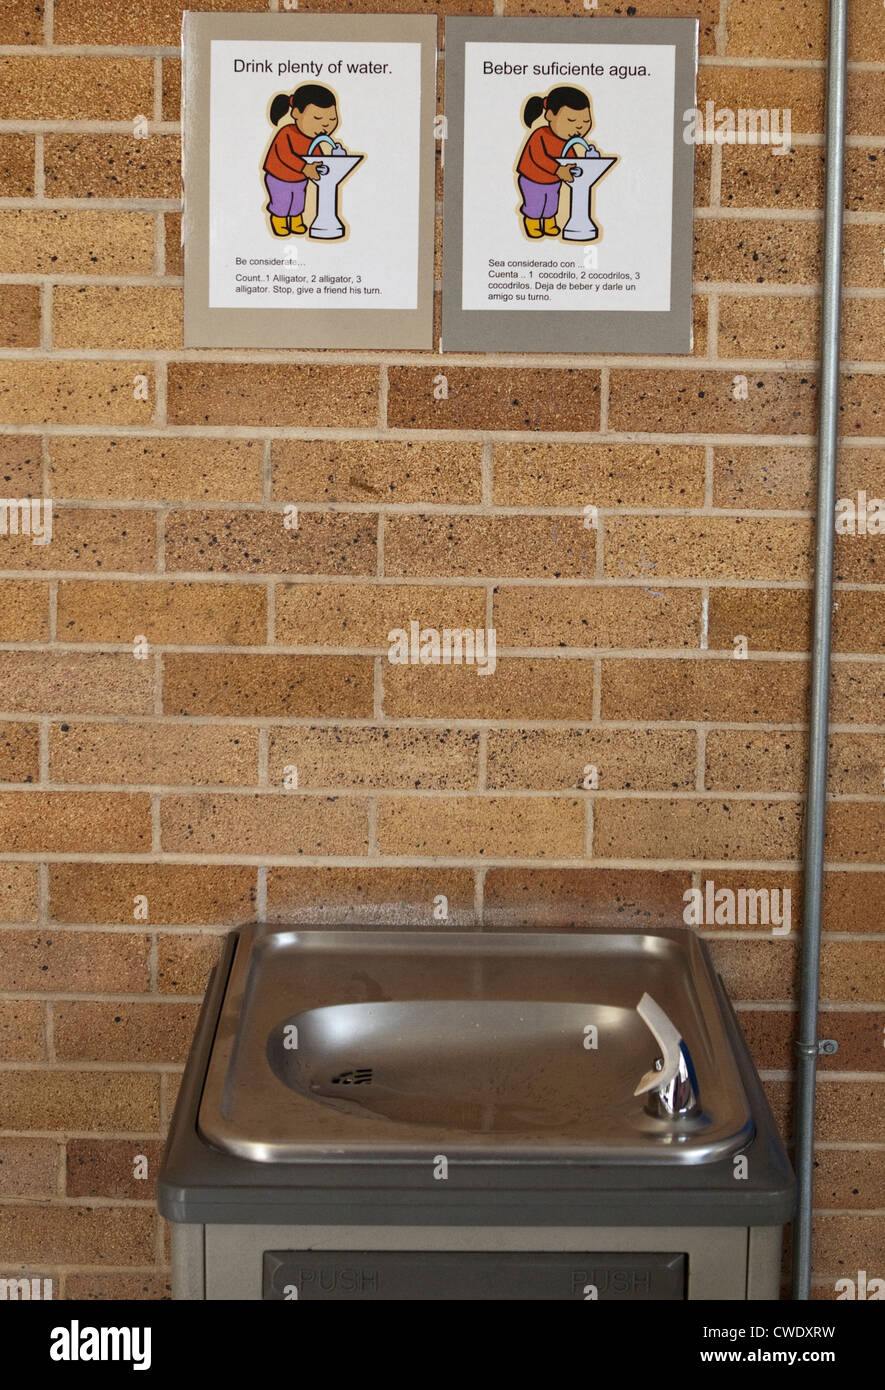 Bilingual sign in English and Spanish on wall of Elementary School in Austin, Texas instructs students to drink plenty of water Stock Photo